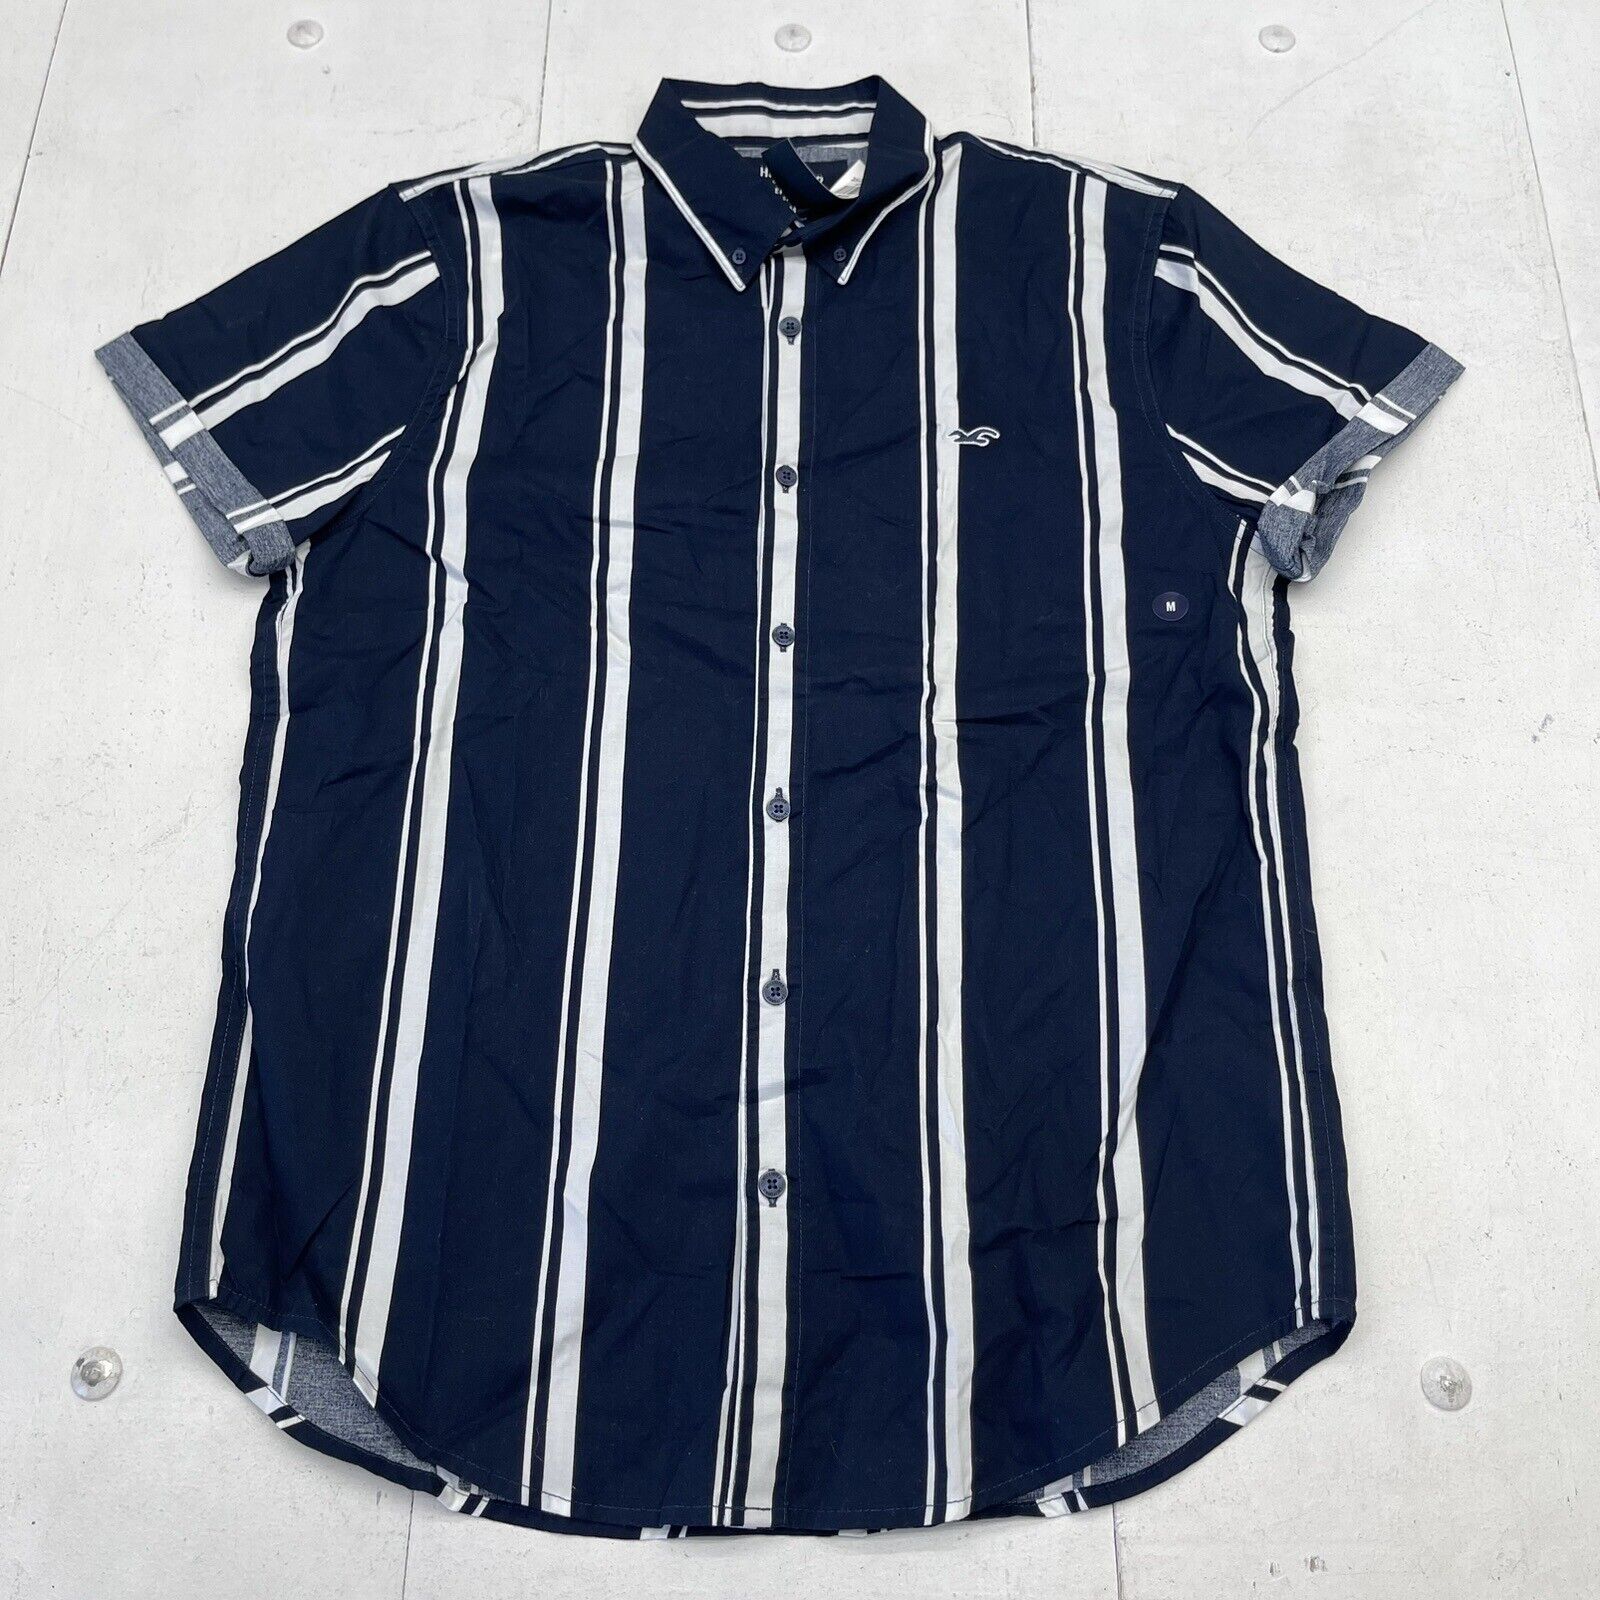 Hollister, Tops, Hollister Striped Button Down Shirt Size Small S